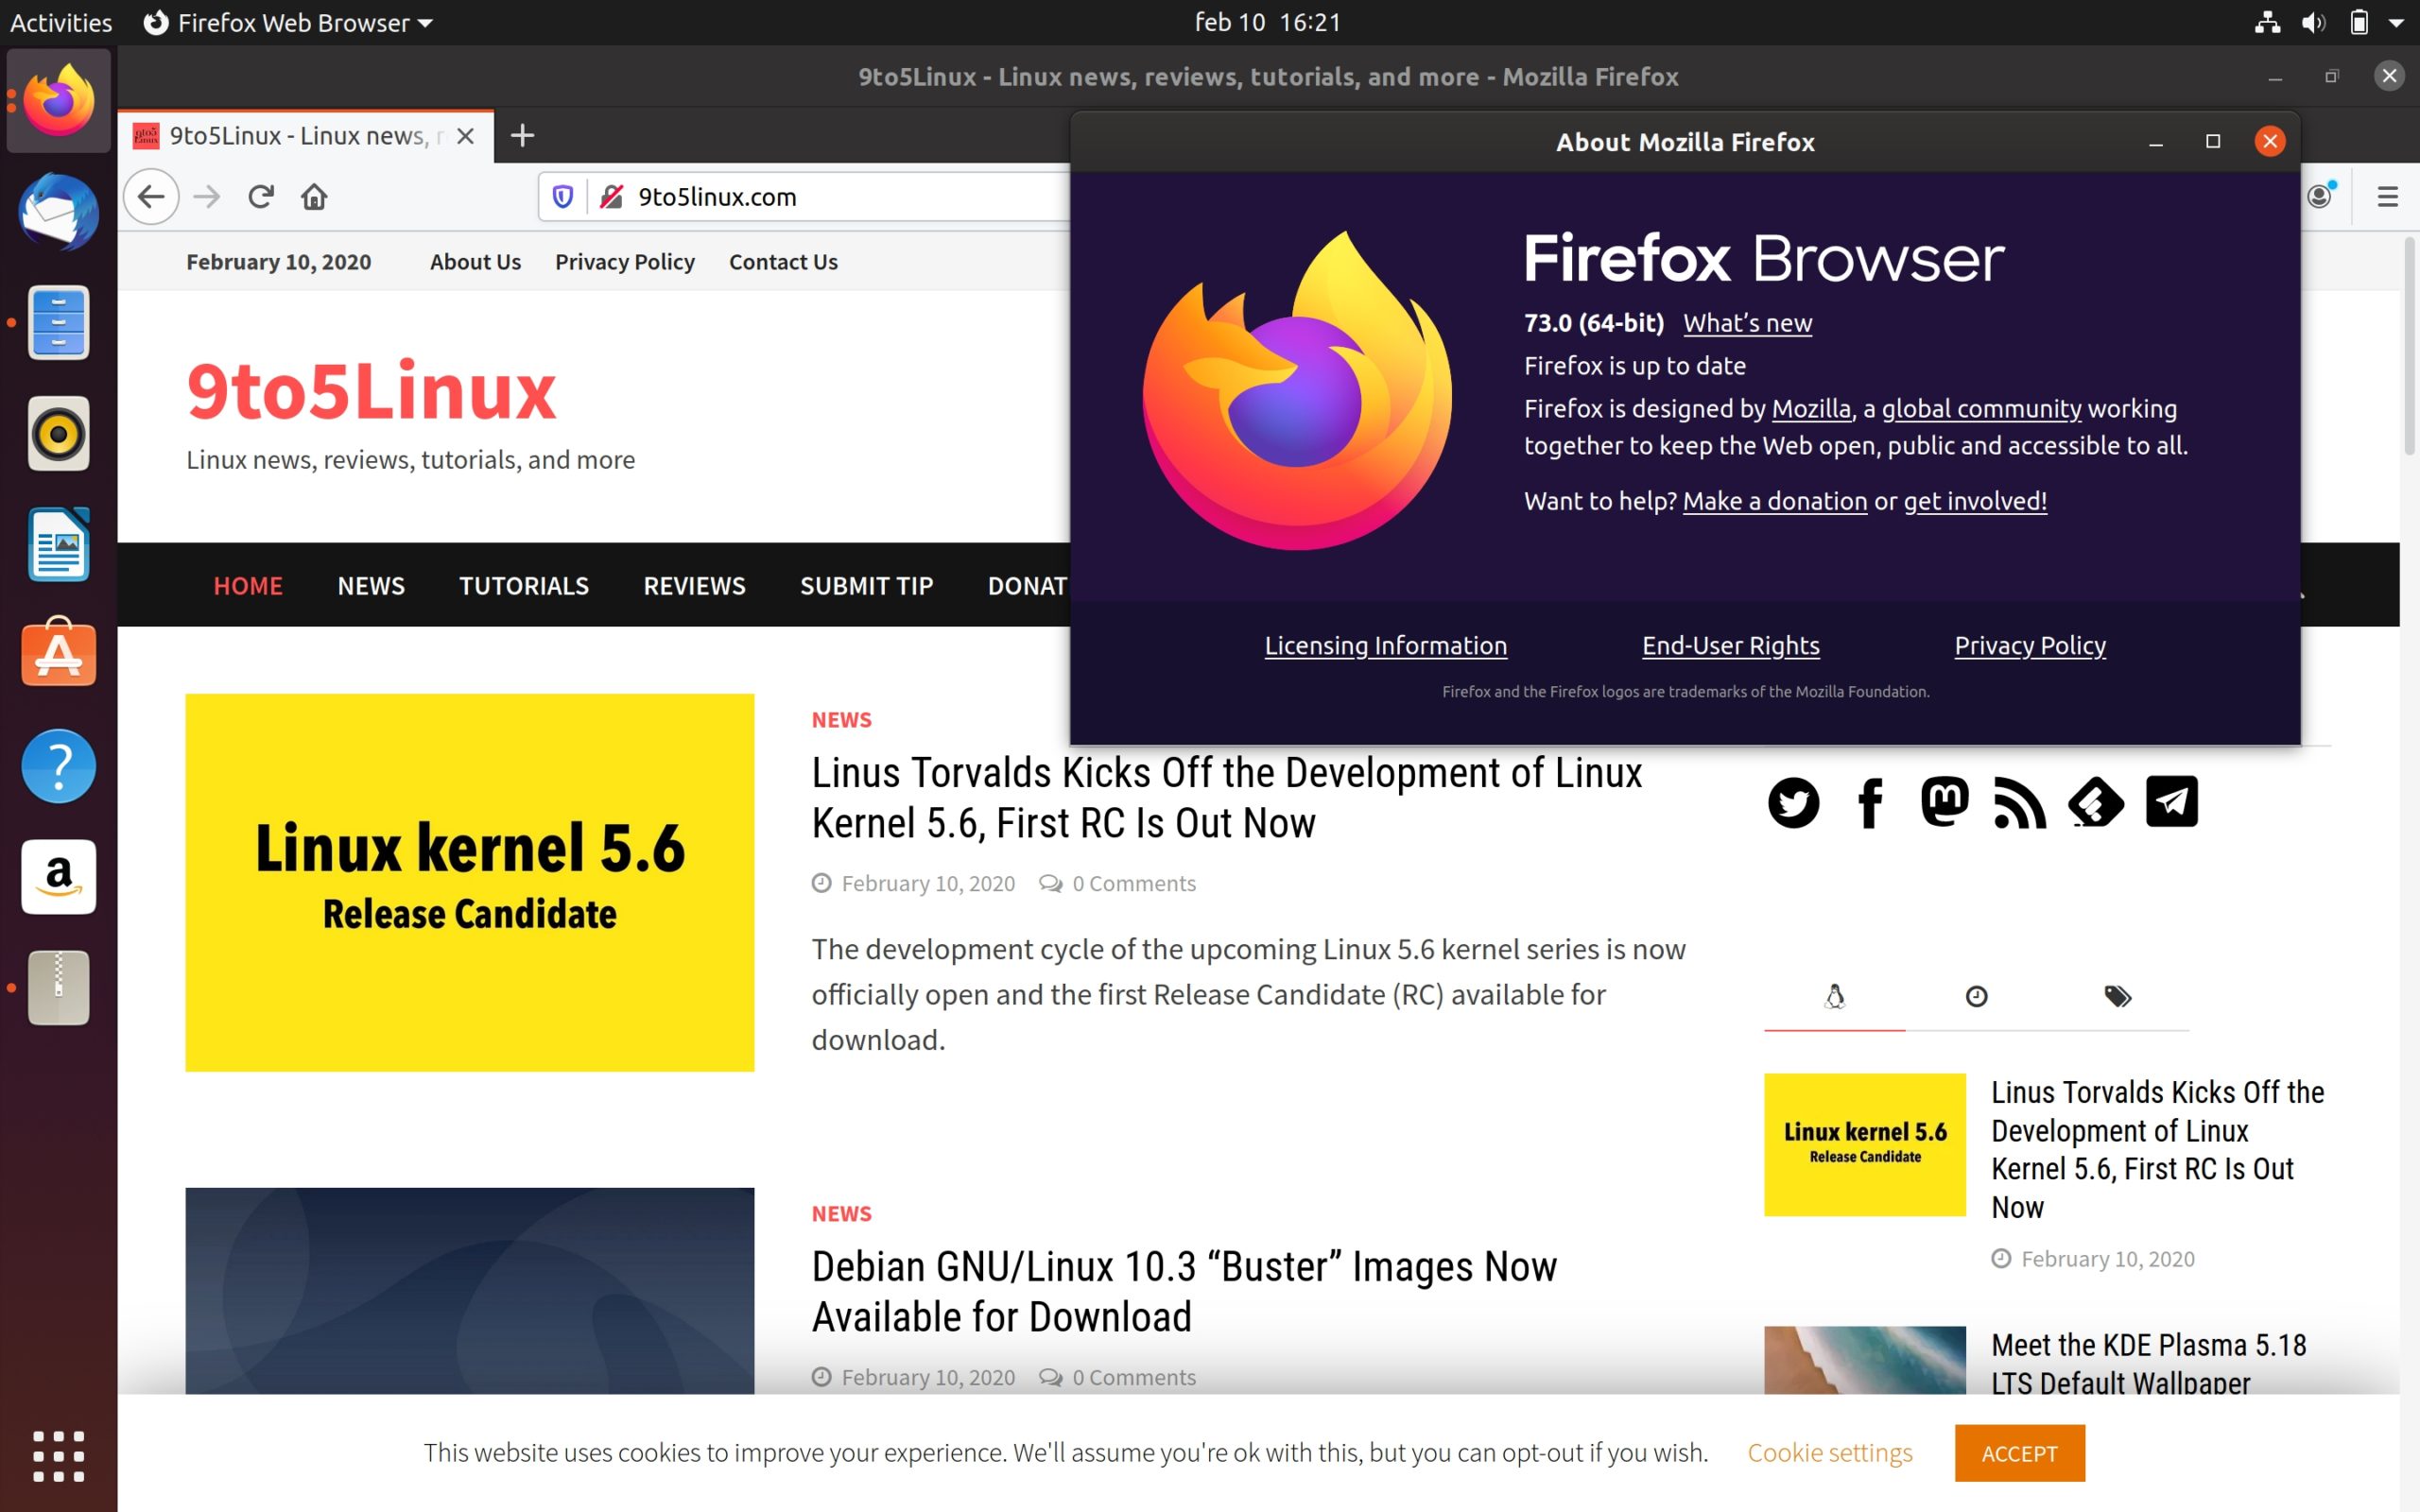 Mozilla Firefox 73 Is Now Available for Download, Here’s What’s New